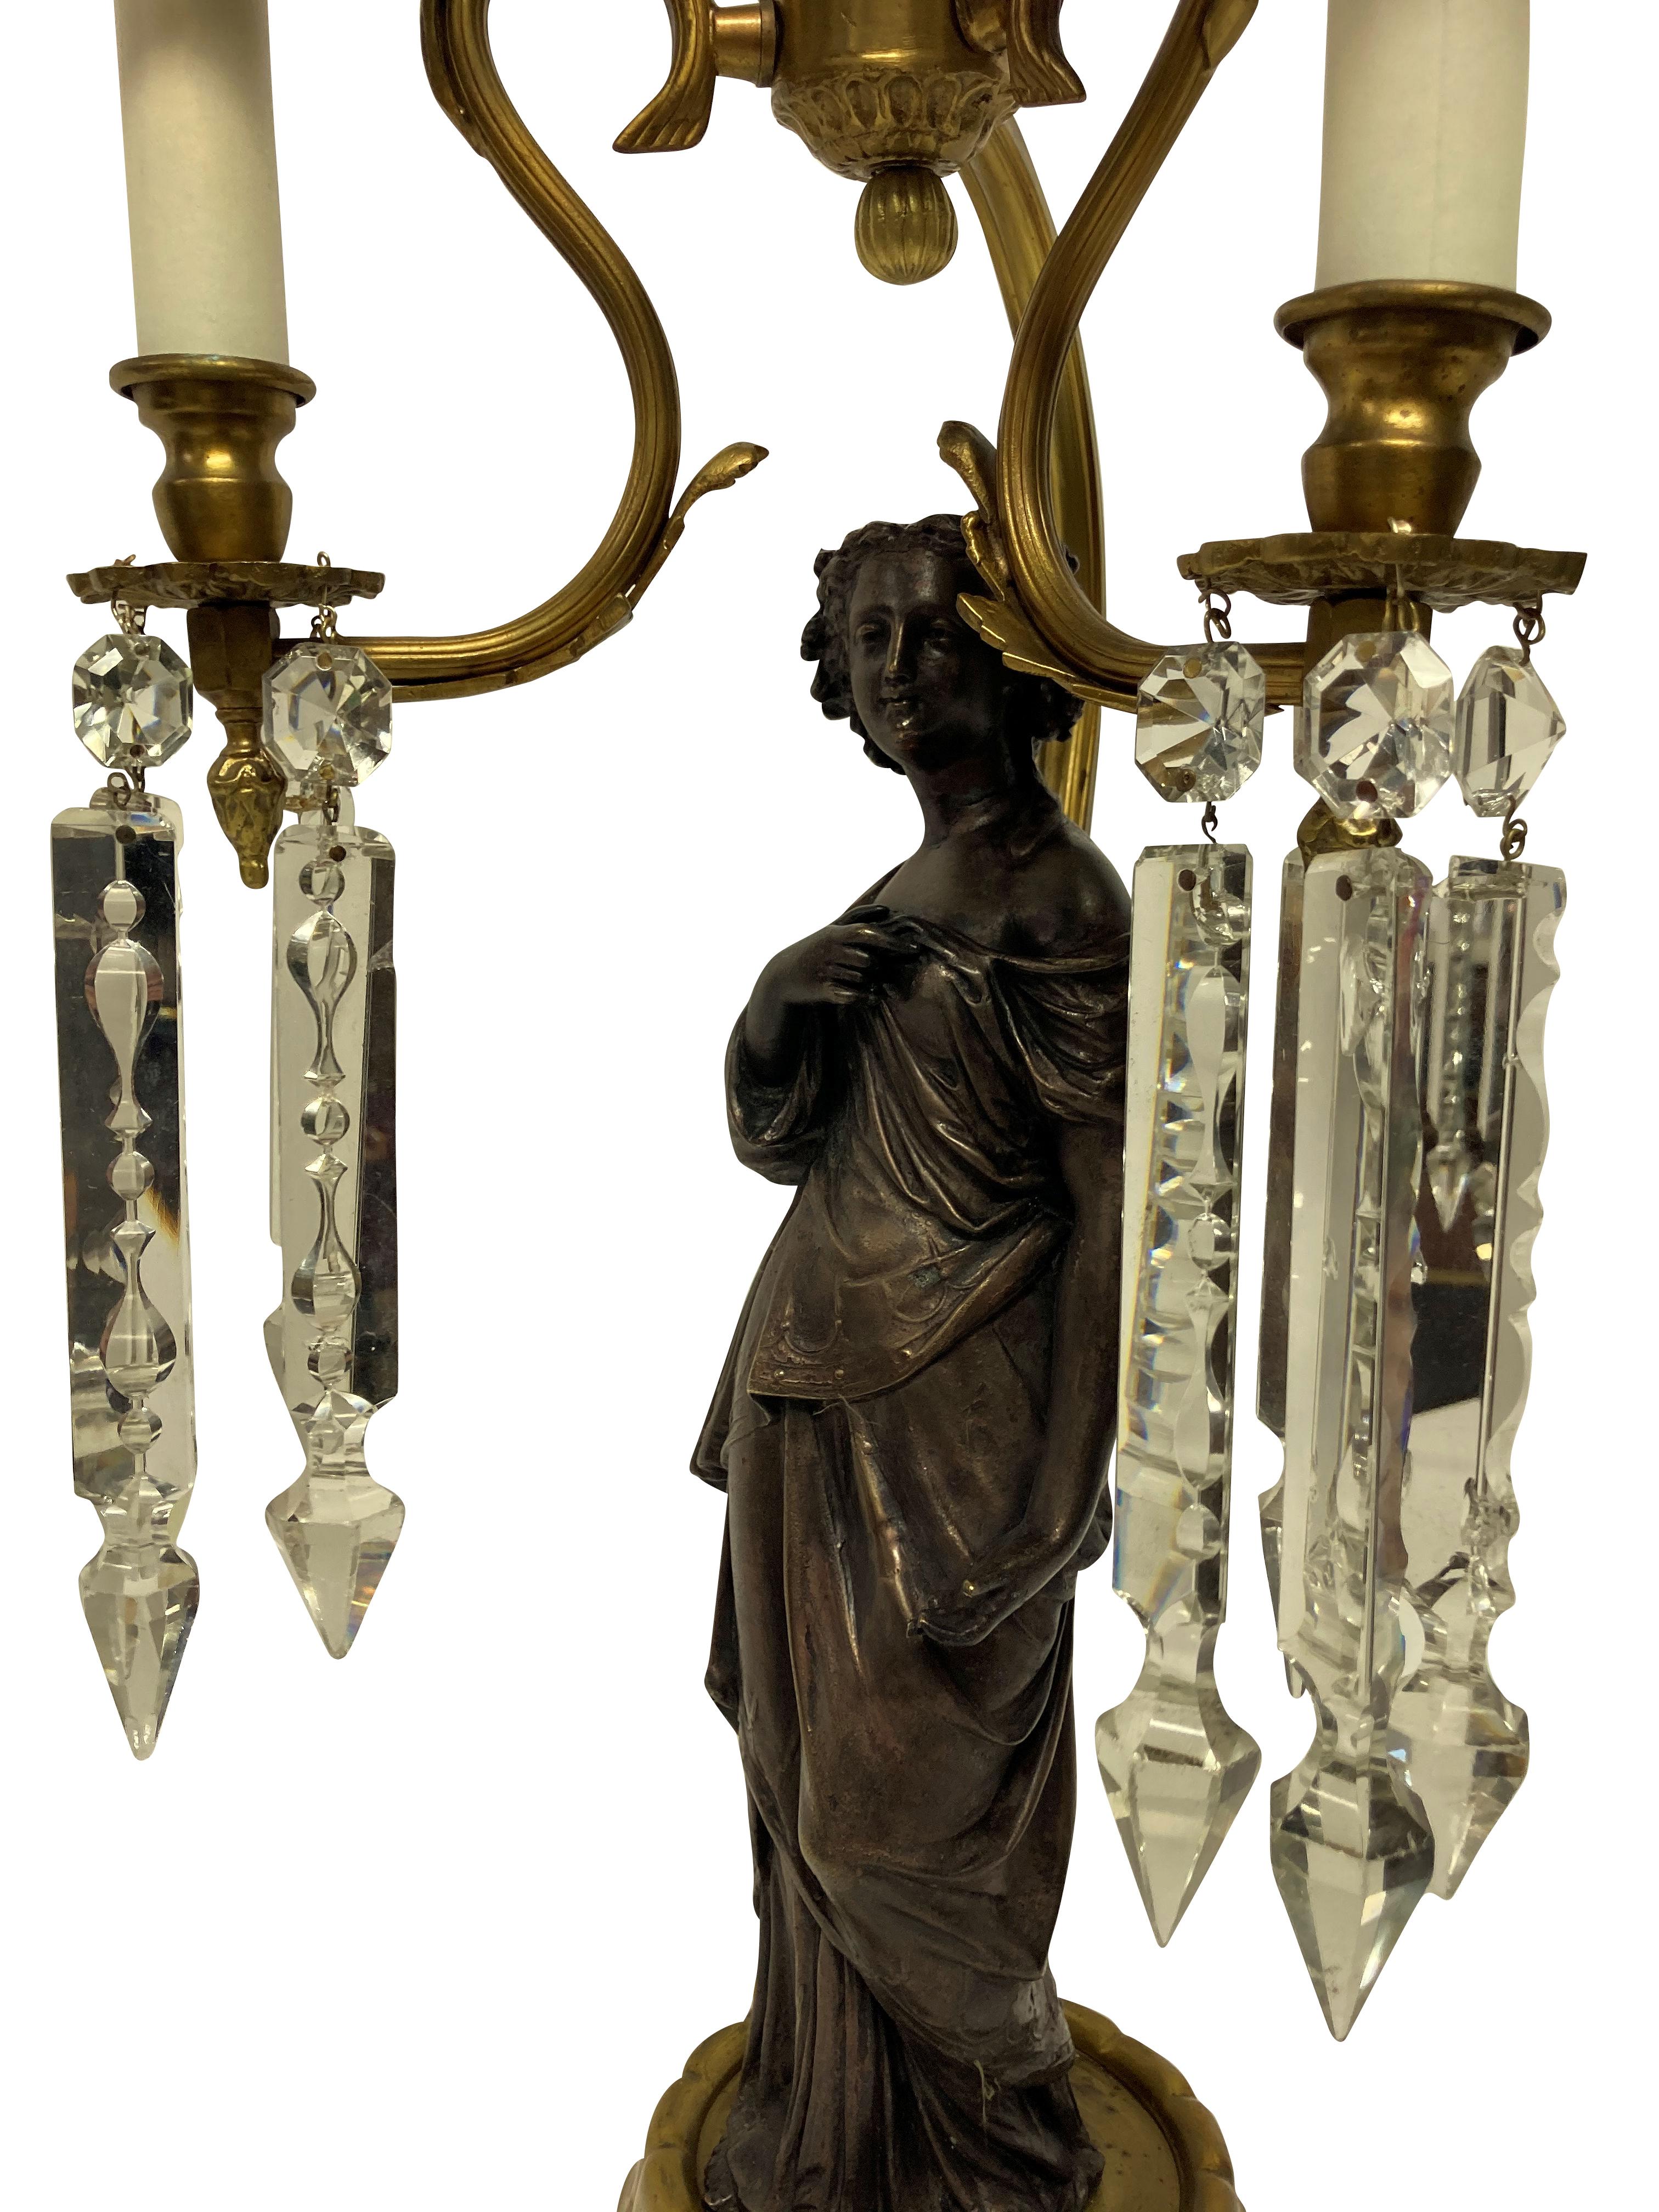 A pair of Italian classical figural lamps depicting woman in Roman dress, each with cut glass pendant drops and with pale blue silk shades.